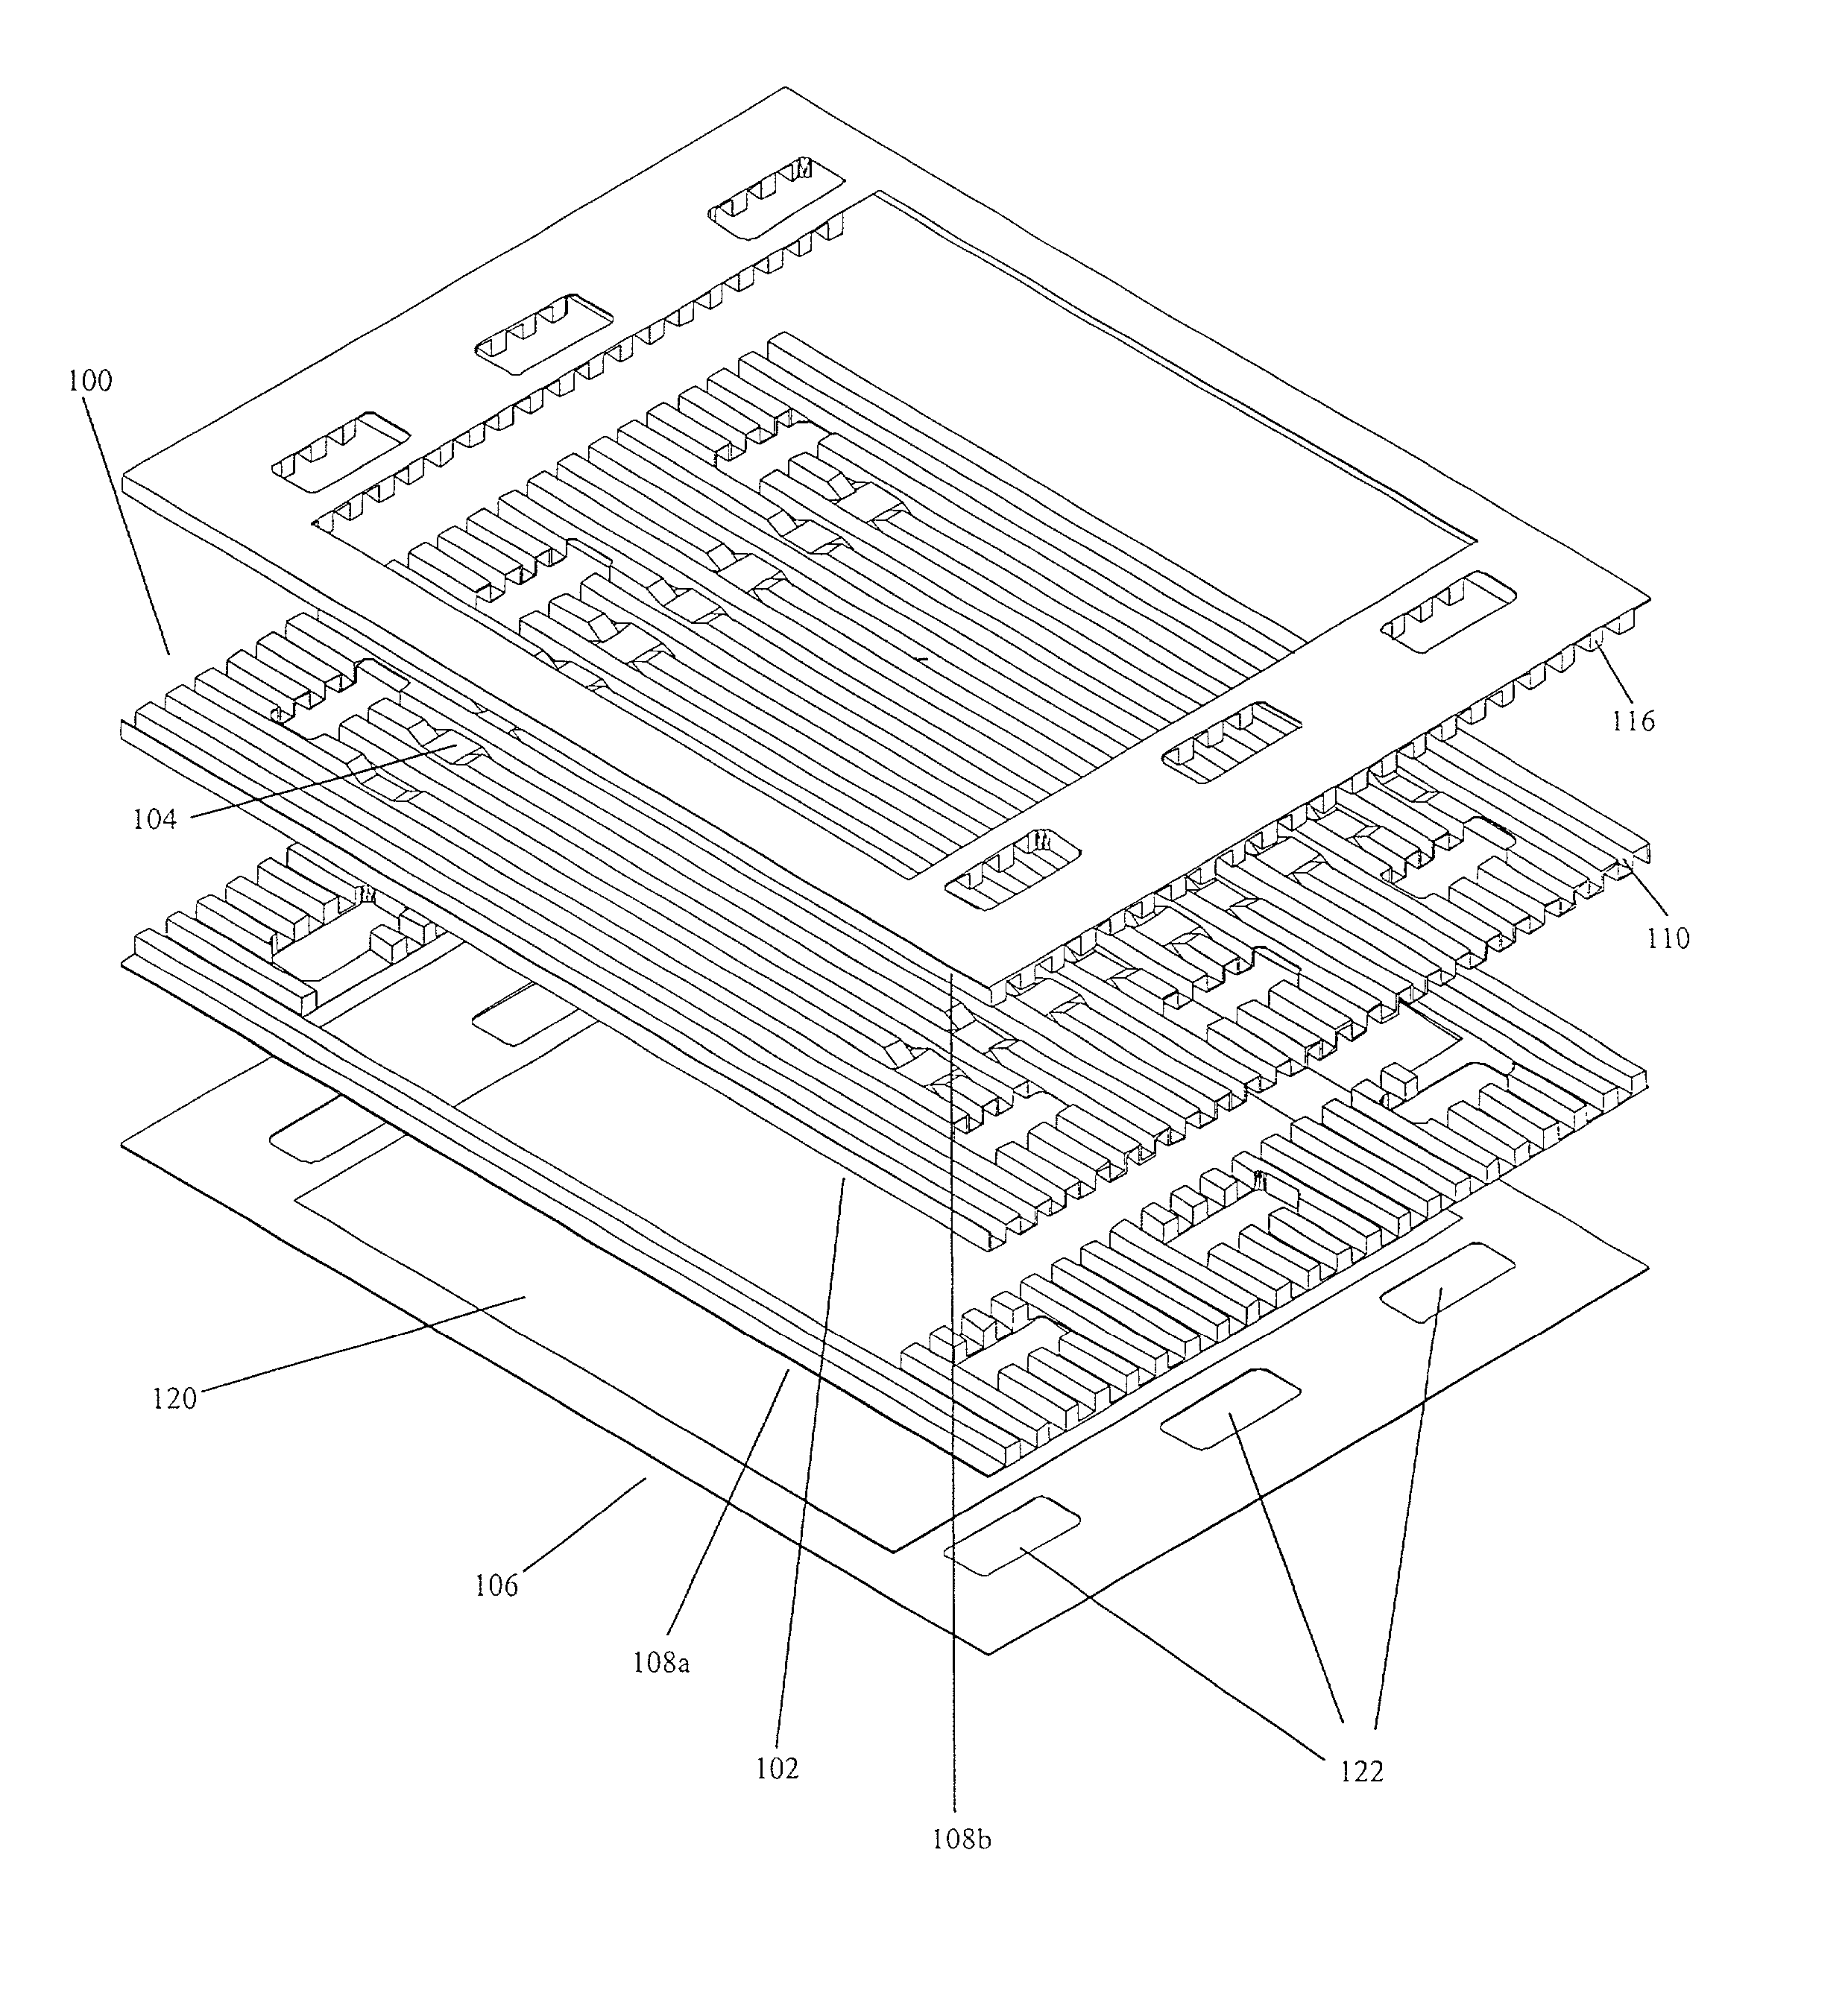 Corrugated flow field plate assembly for a fuel cell